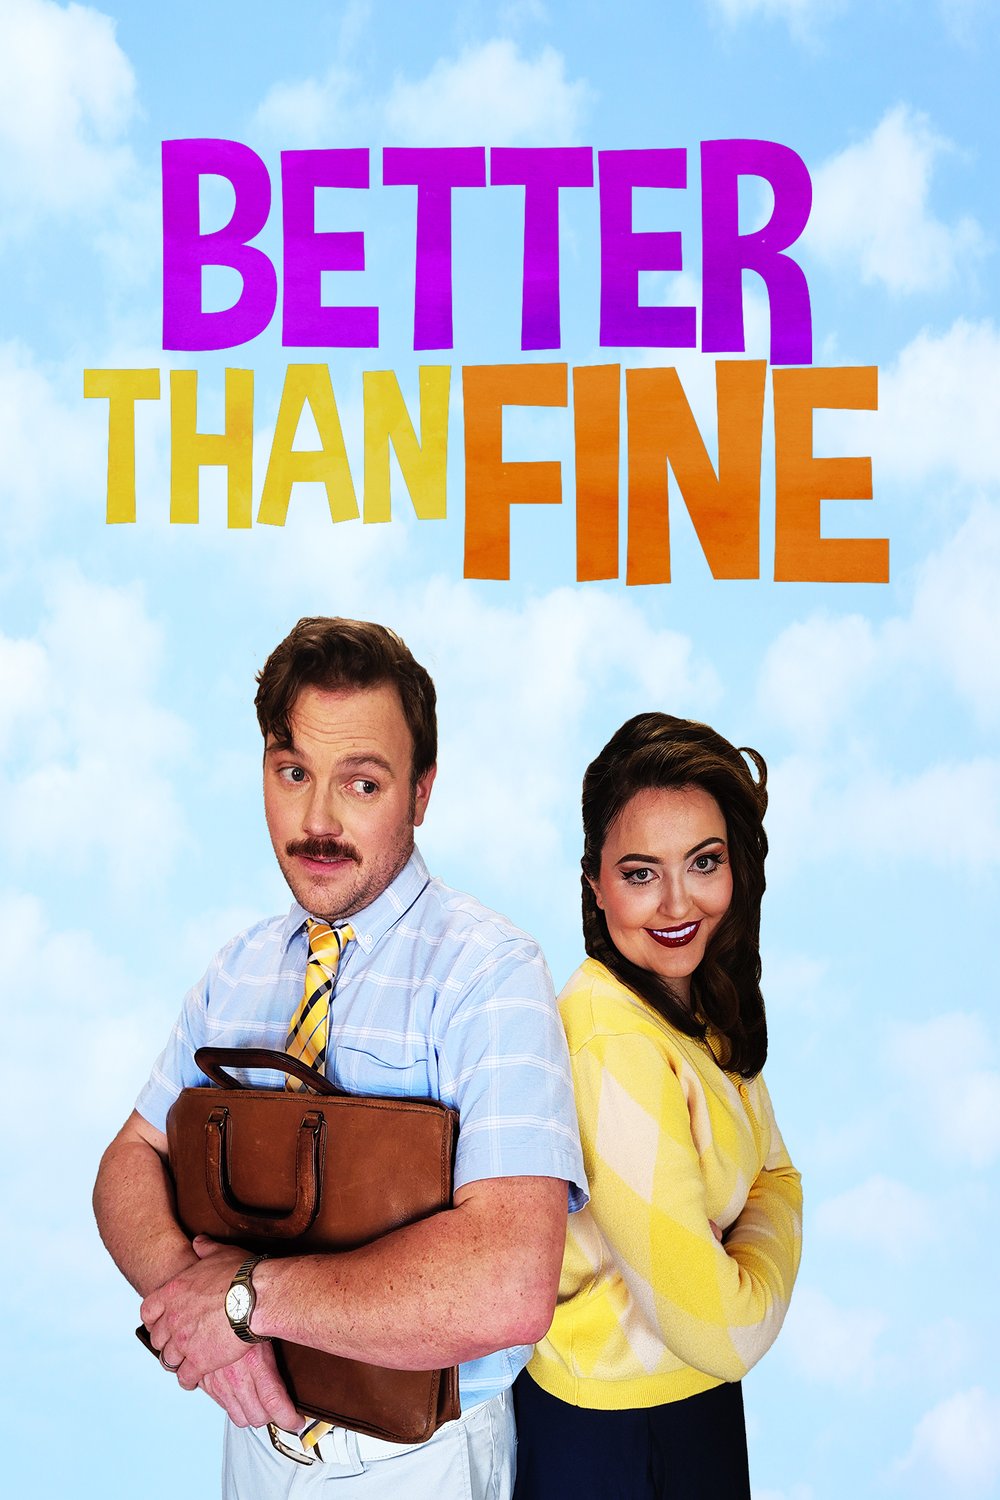 Poster of the movie Better Than Fine